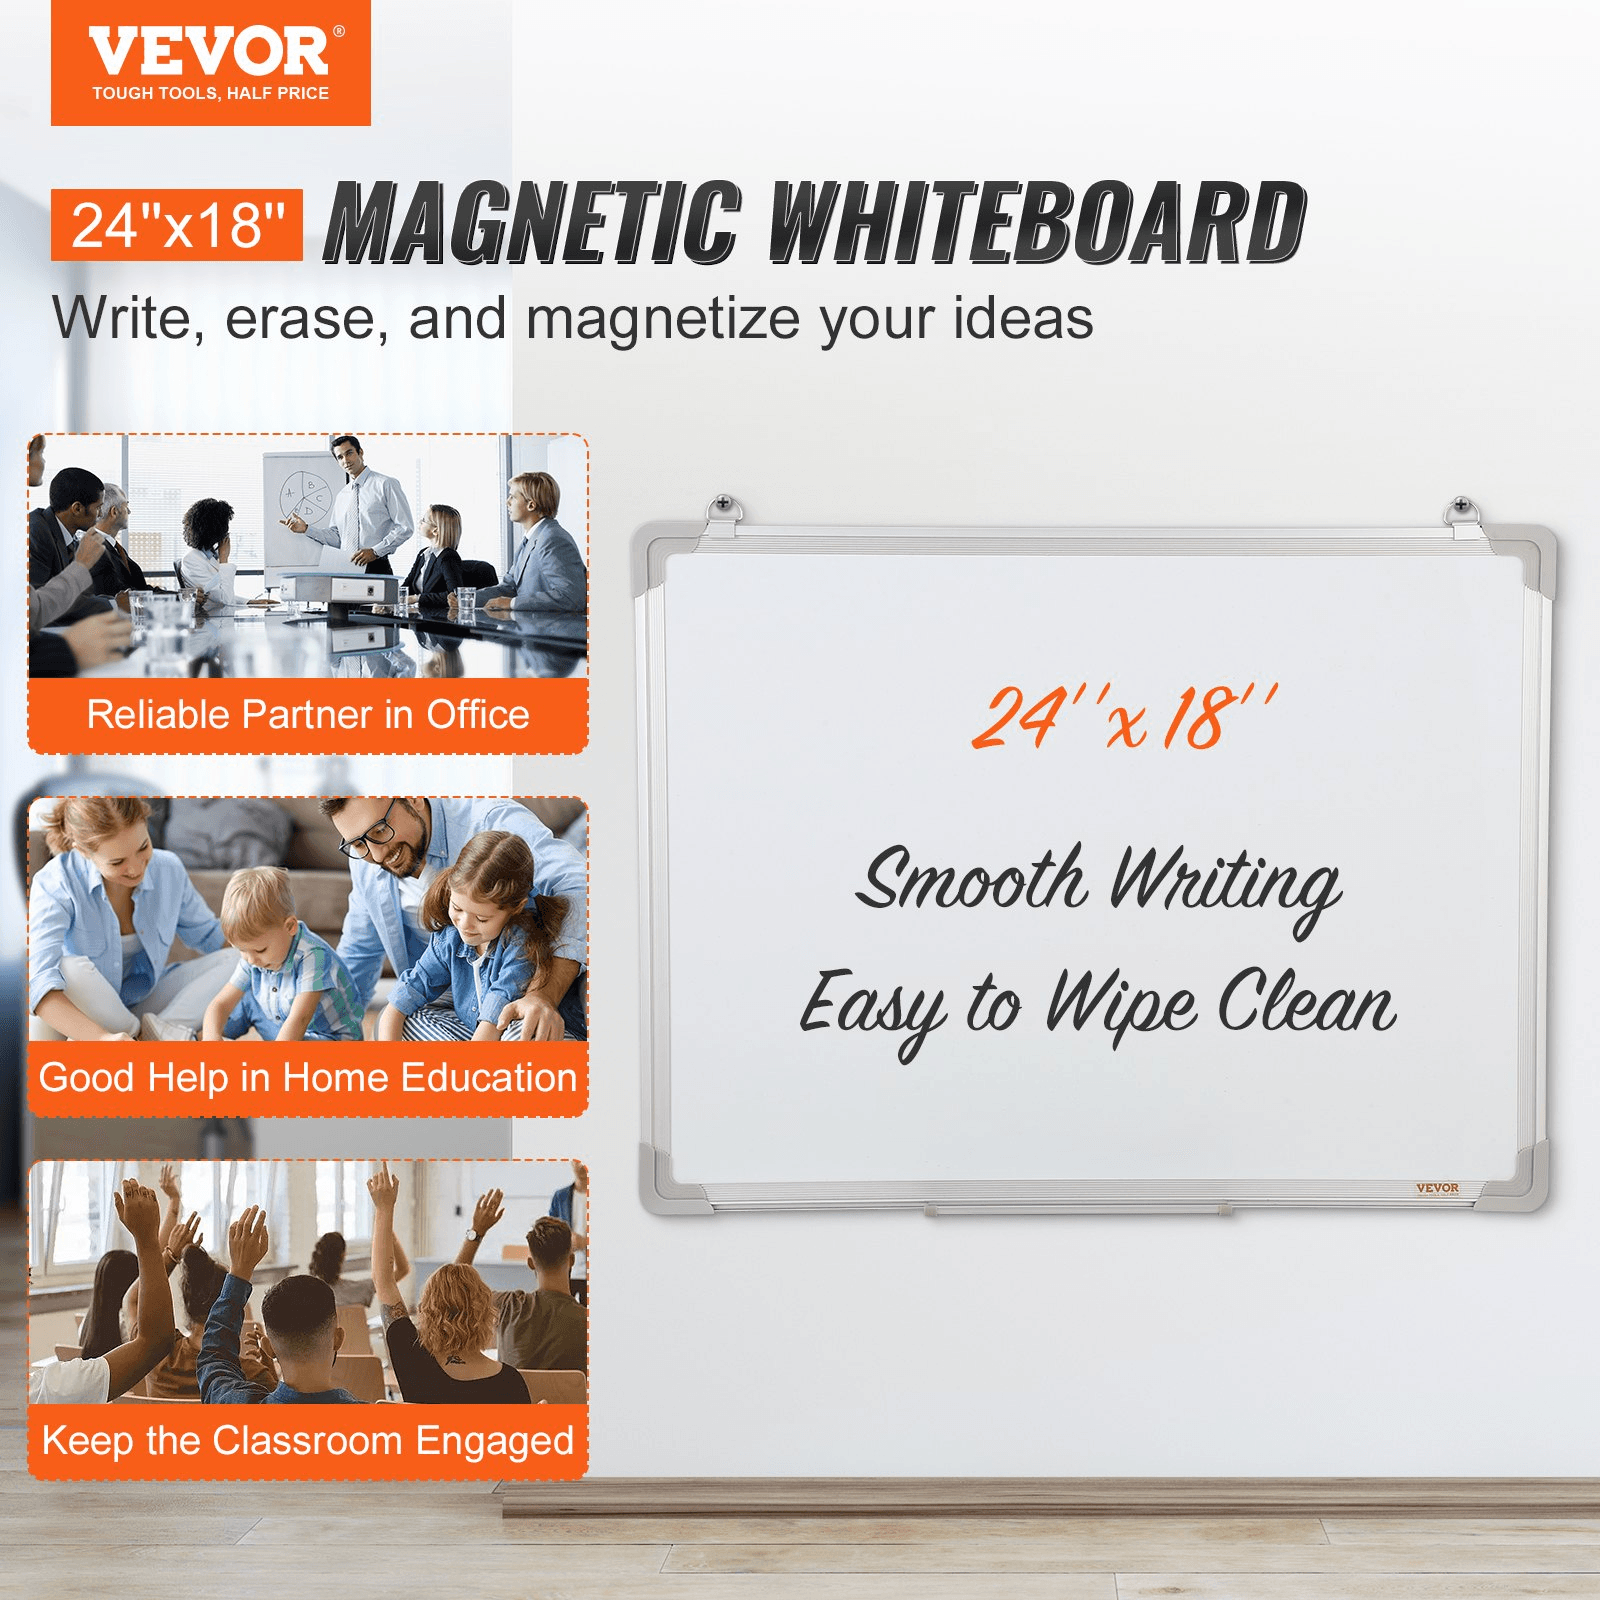 VEVOR Magnetic Whiteboard, 24 x 18 Inches, Dry Erase Board for Wall with Aluminum Frame, White Board Includes 1 Magnetic Erase & 2 Dry Erase Marker & Movable Tray for Office Home Restaurant and School - Loomini